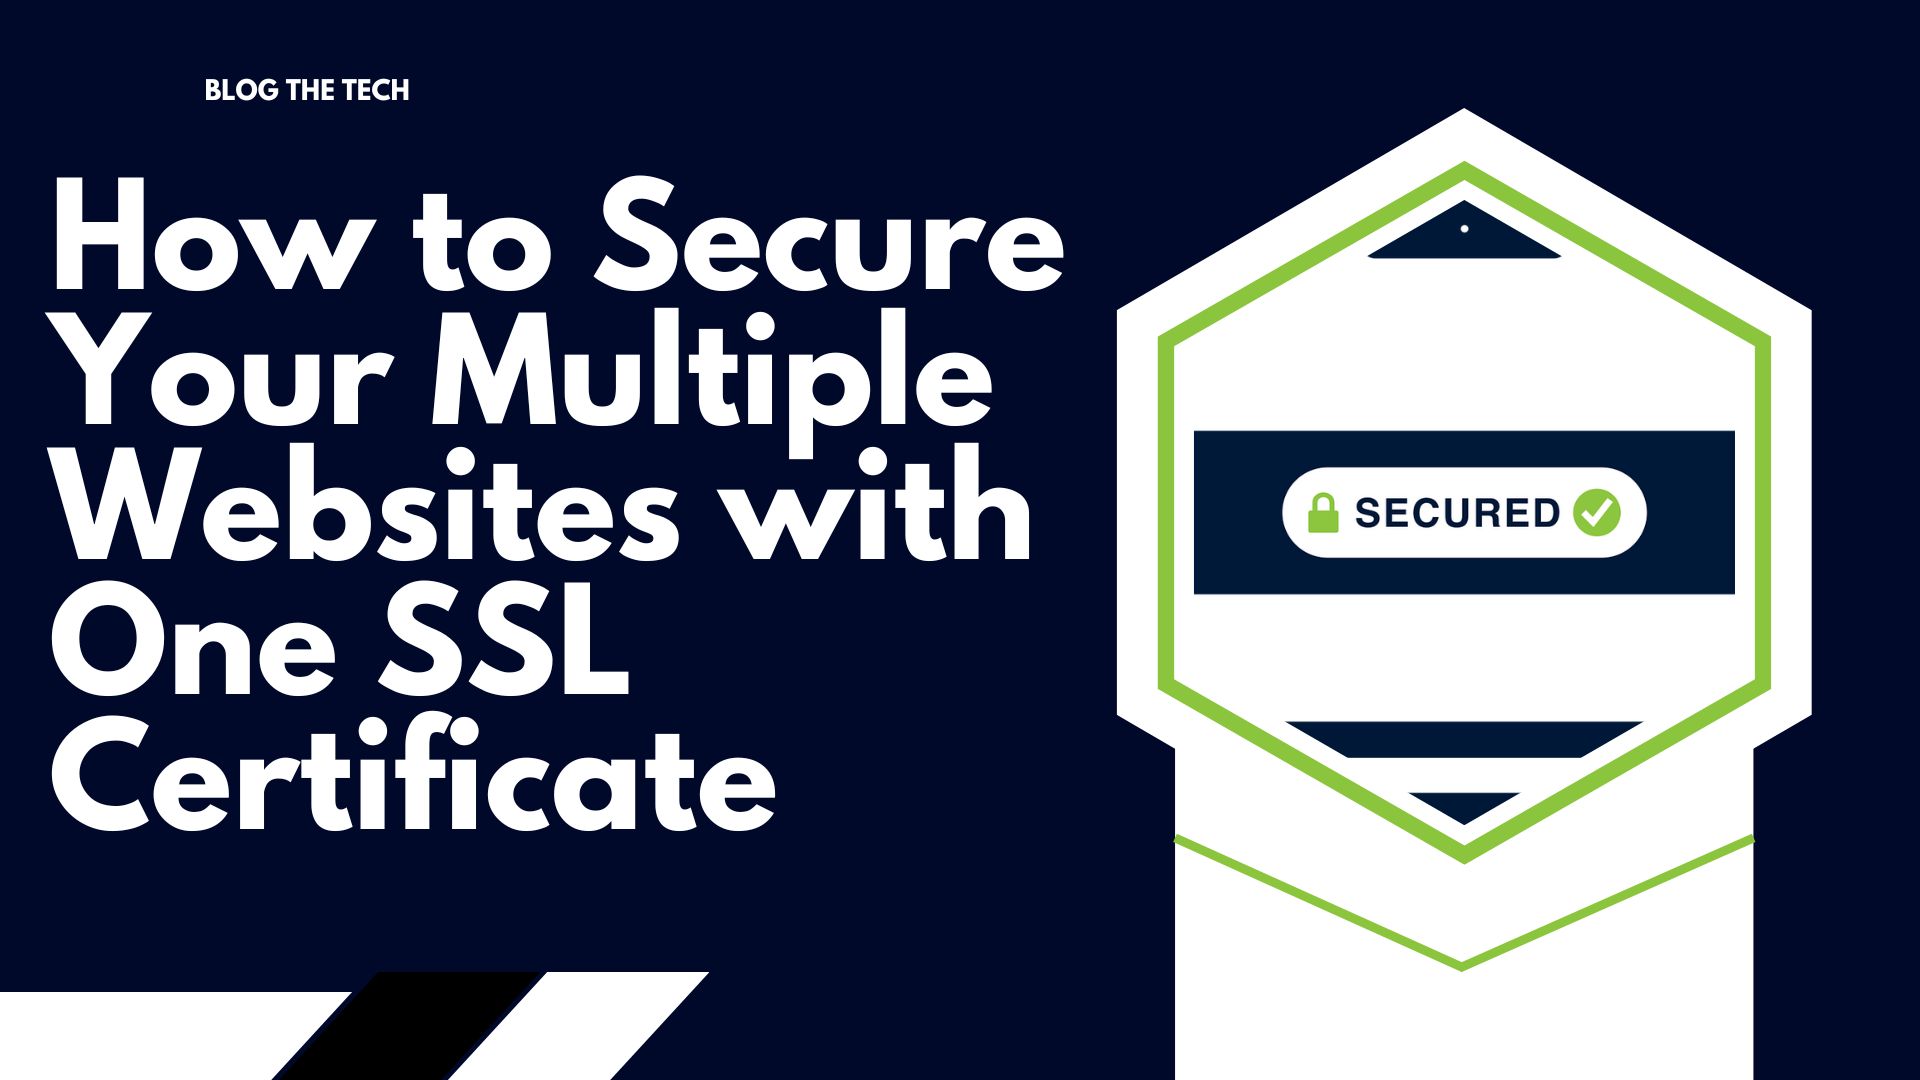 How to Secure Your Multiple Websites with One SSL Certificate